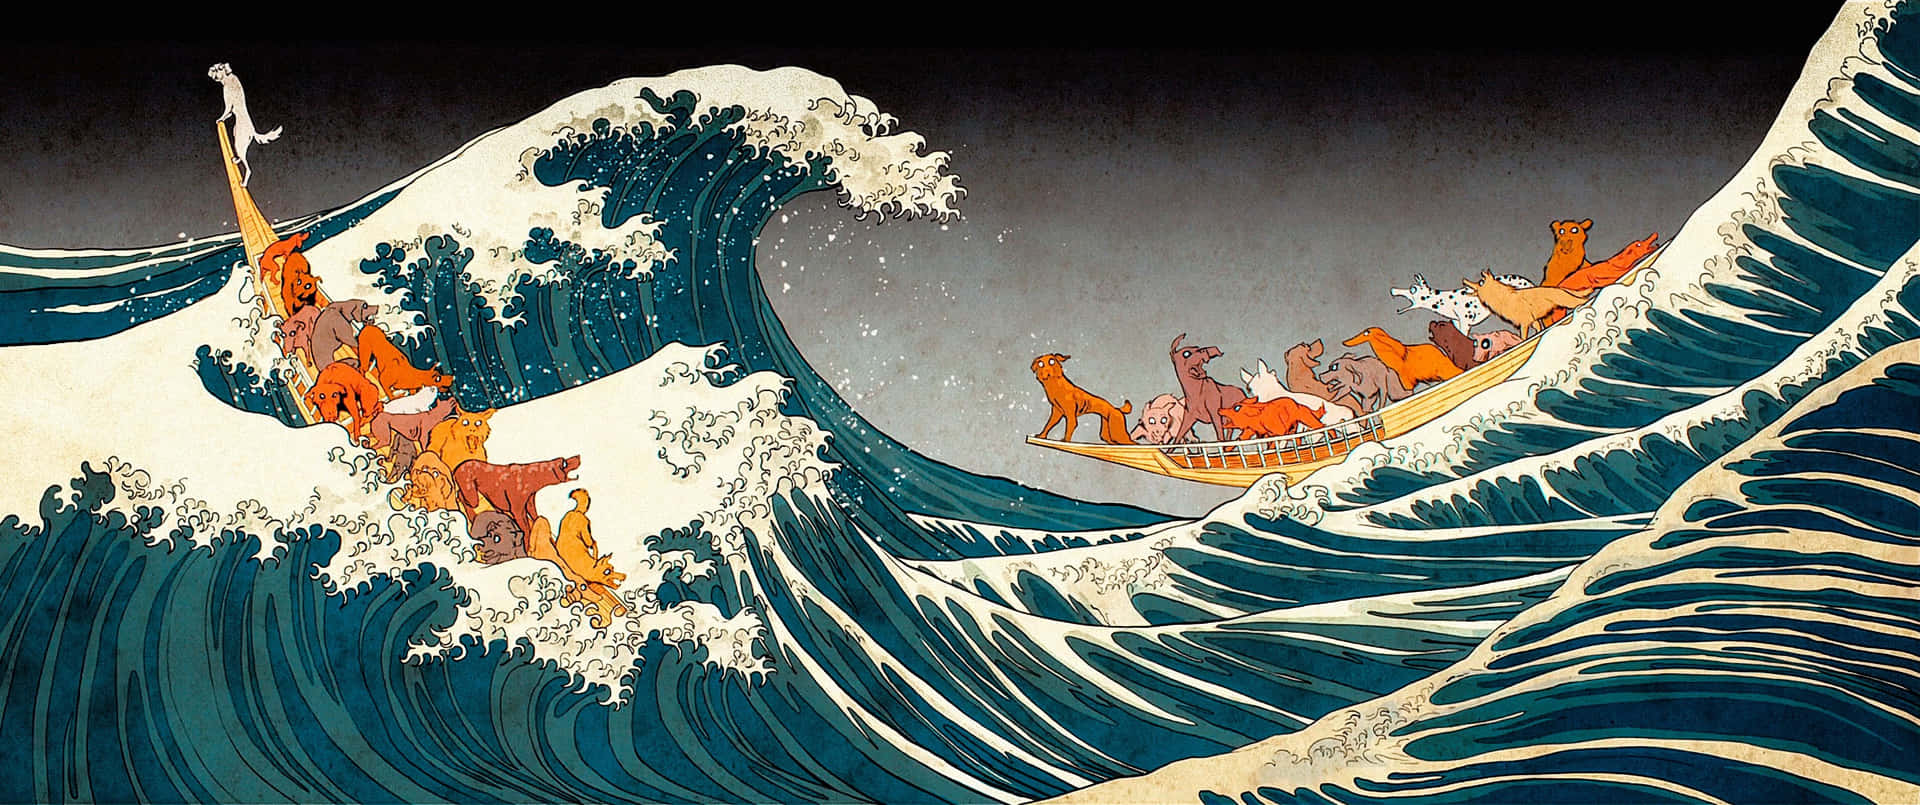 The Great Wave Isle Of Dogs Wallpaper